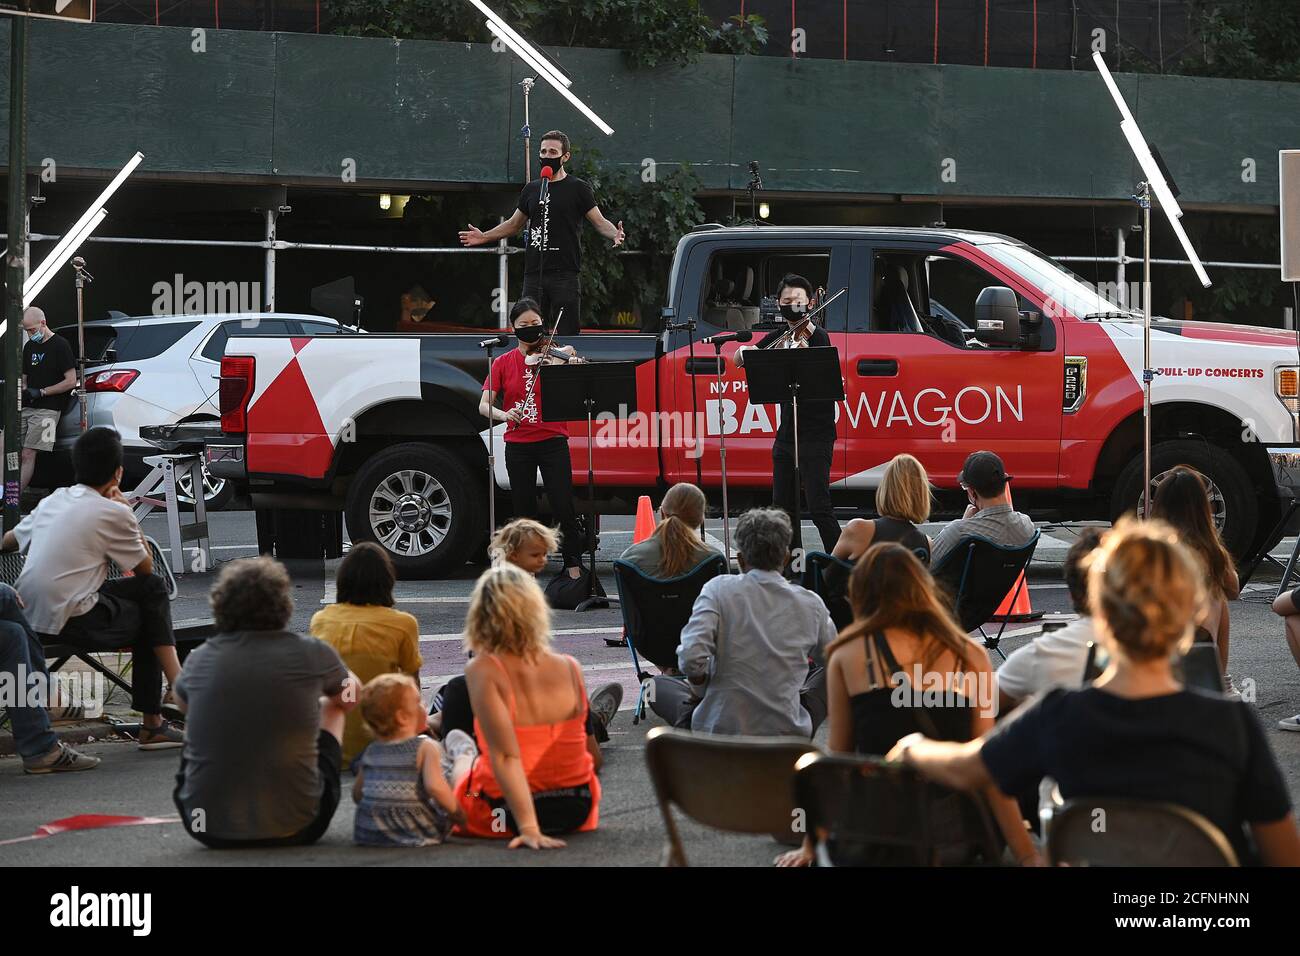 Members of the New York Philharmonic, Countertenor and Producer Anthony Ross Constanzo, accompanied orchestra members violinist Quan Ge and assistant viola Cong Wu, sings from the flatbed of the “NY Phil Bandwagon” pickup truck in front of a gathered crowd at The Lot Radio in the Brooklyn borough of New York, NY, September 6, 2020. With music venues still closed due to COVID-19 pandemic restrictions, the New York Philharmonic created “pull-up” performance throughout the five New York City boroughs, but does not give any advance notice to minimize crowd size and the risk of spreading the corona Stock Photo